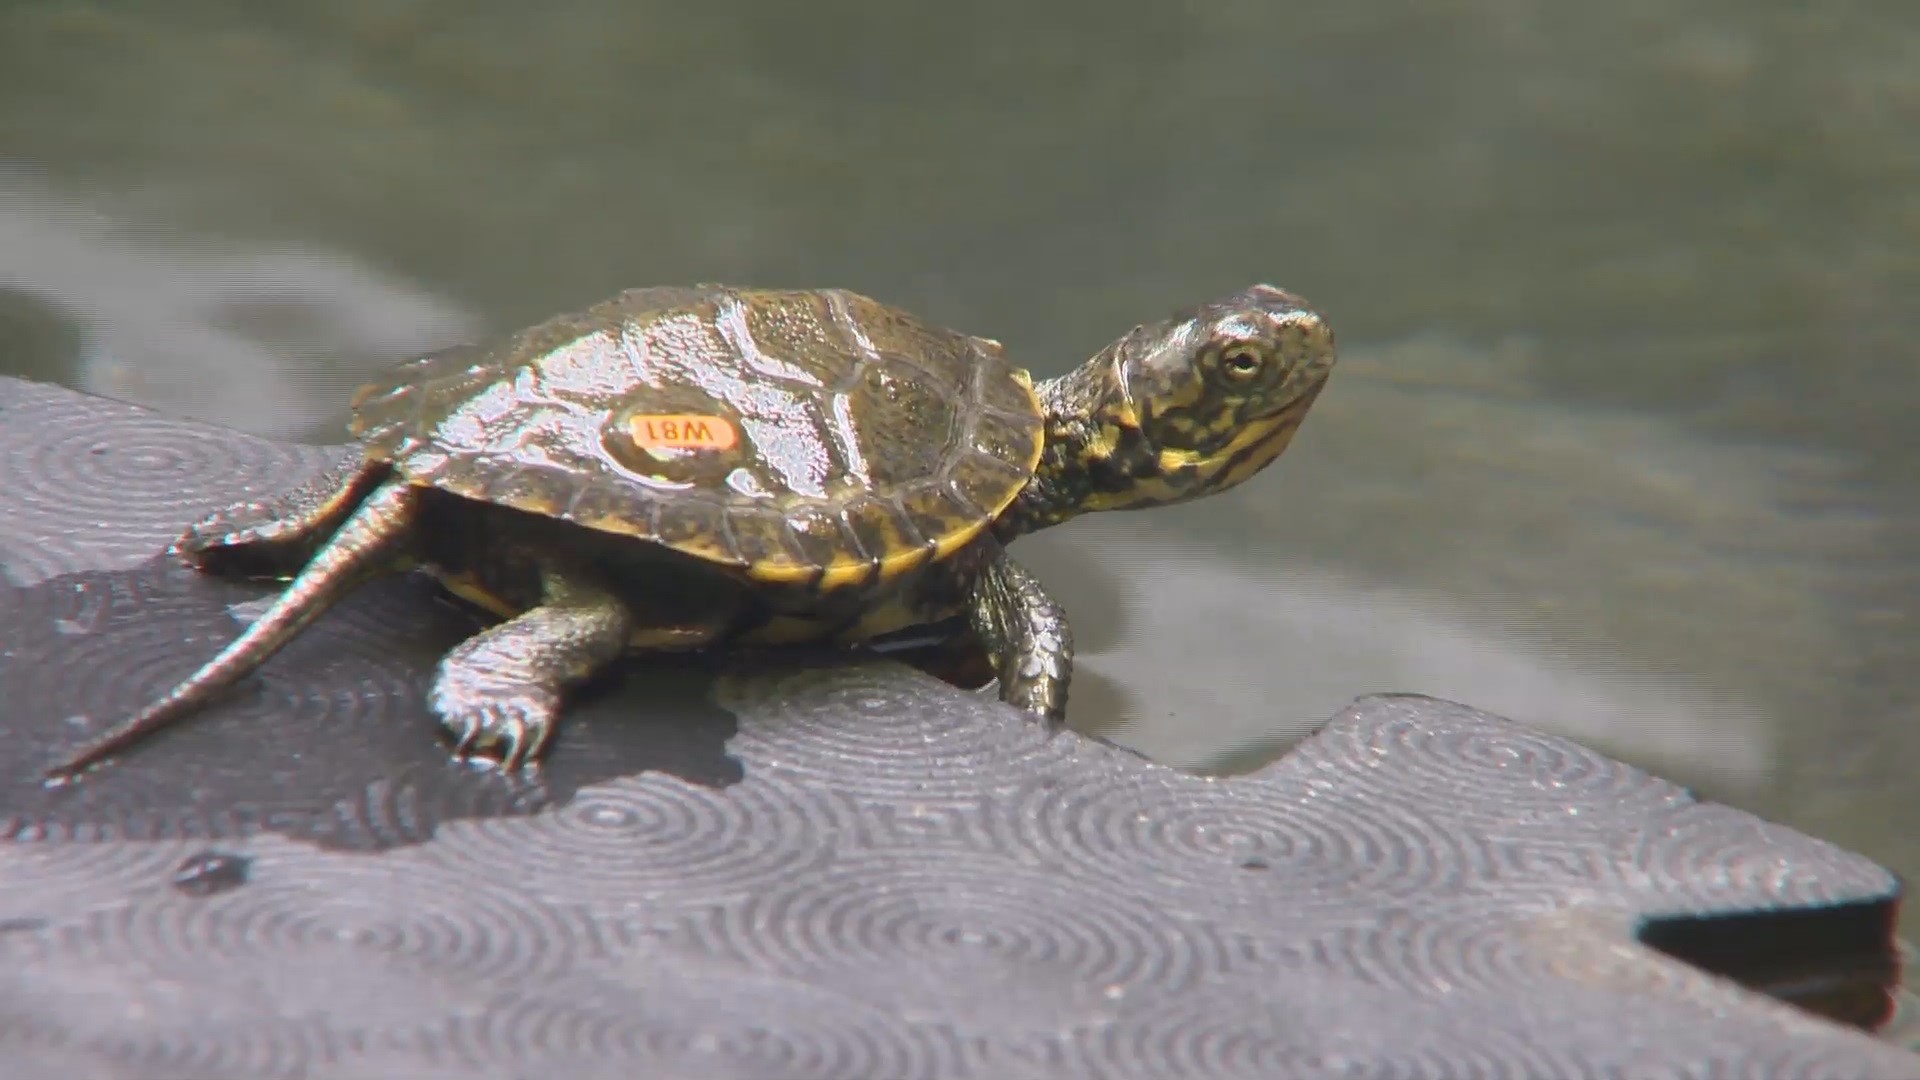 The Oregon Zoo joined repopulation efforts in 1998. Today, more than 1,800 turtles have been released to new population sites.